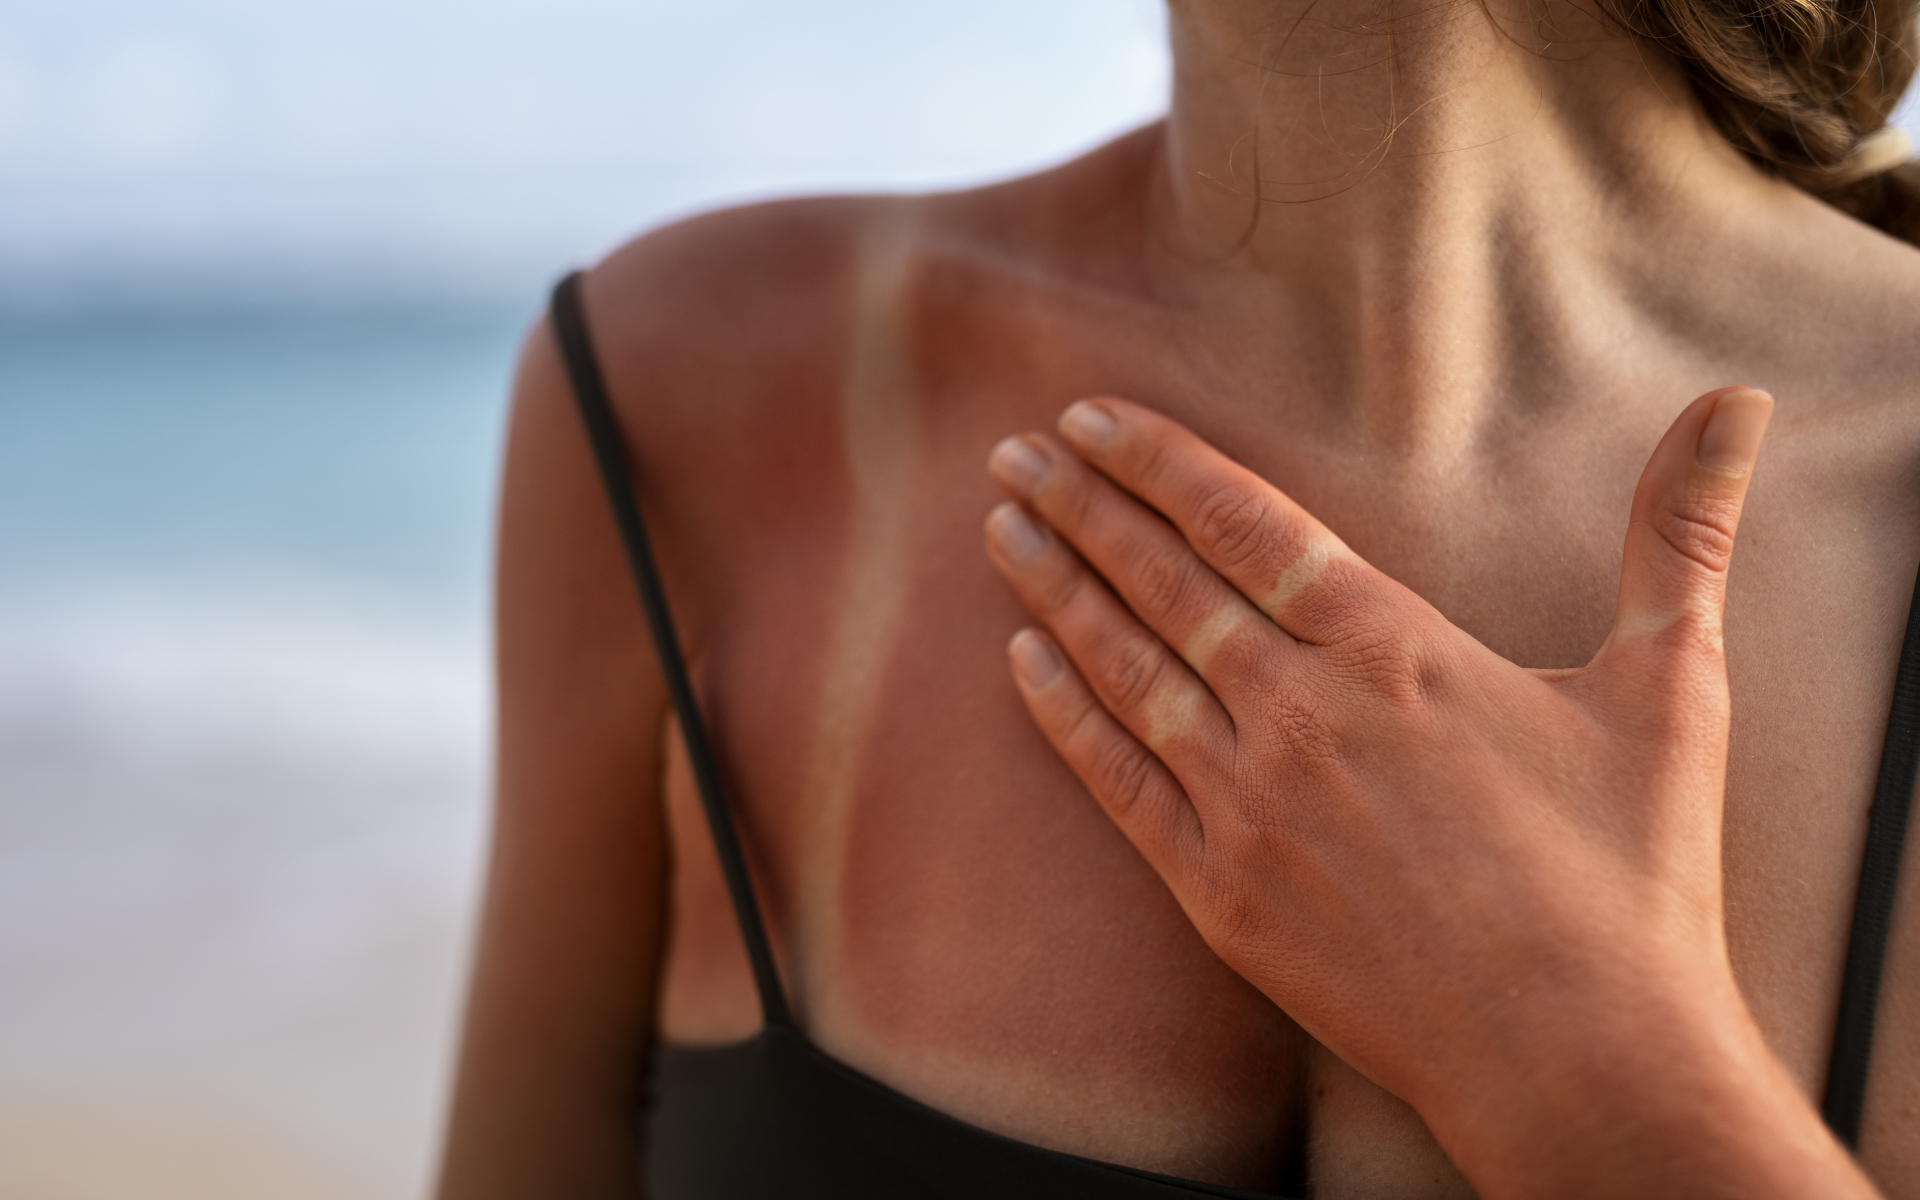 How To Turn A Sunburn Into A Tan Overnight